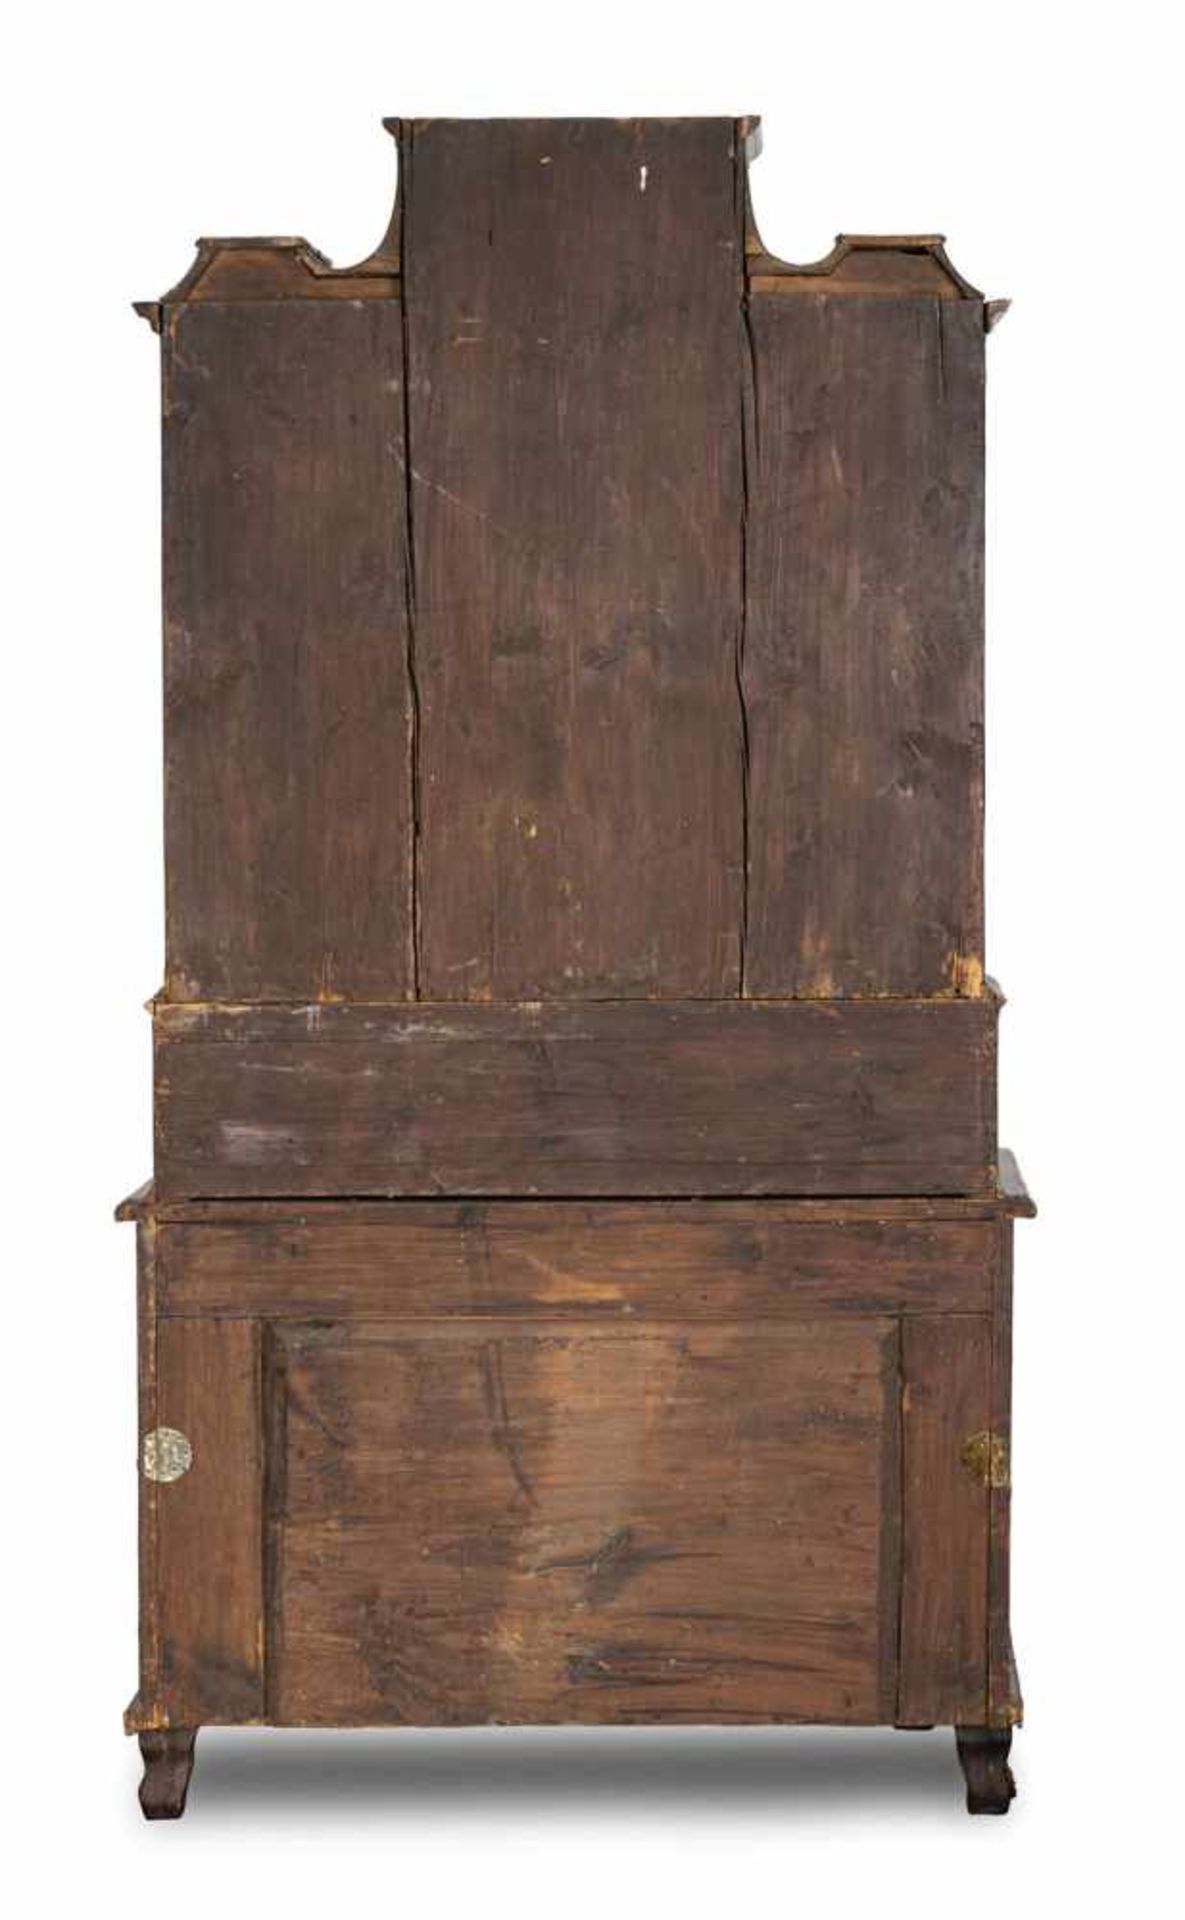 A Baroque brass mounted walnut and plum bureau cabinet, South Germany, mid 18th ct. Rest. Add. Signs - Bild 3 aus 3